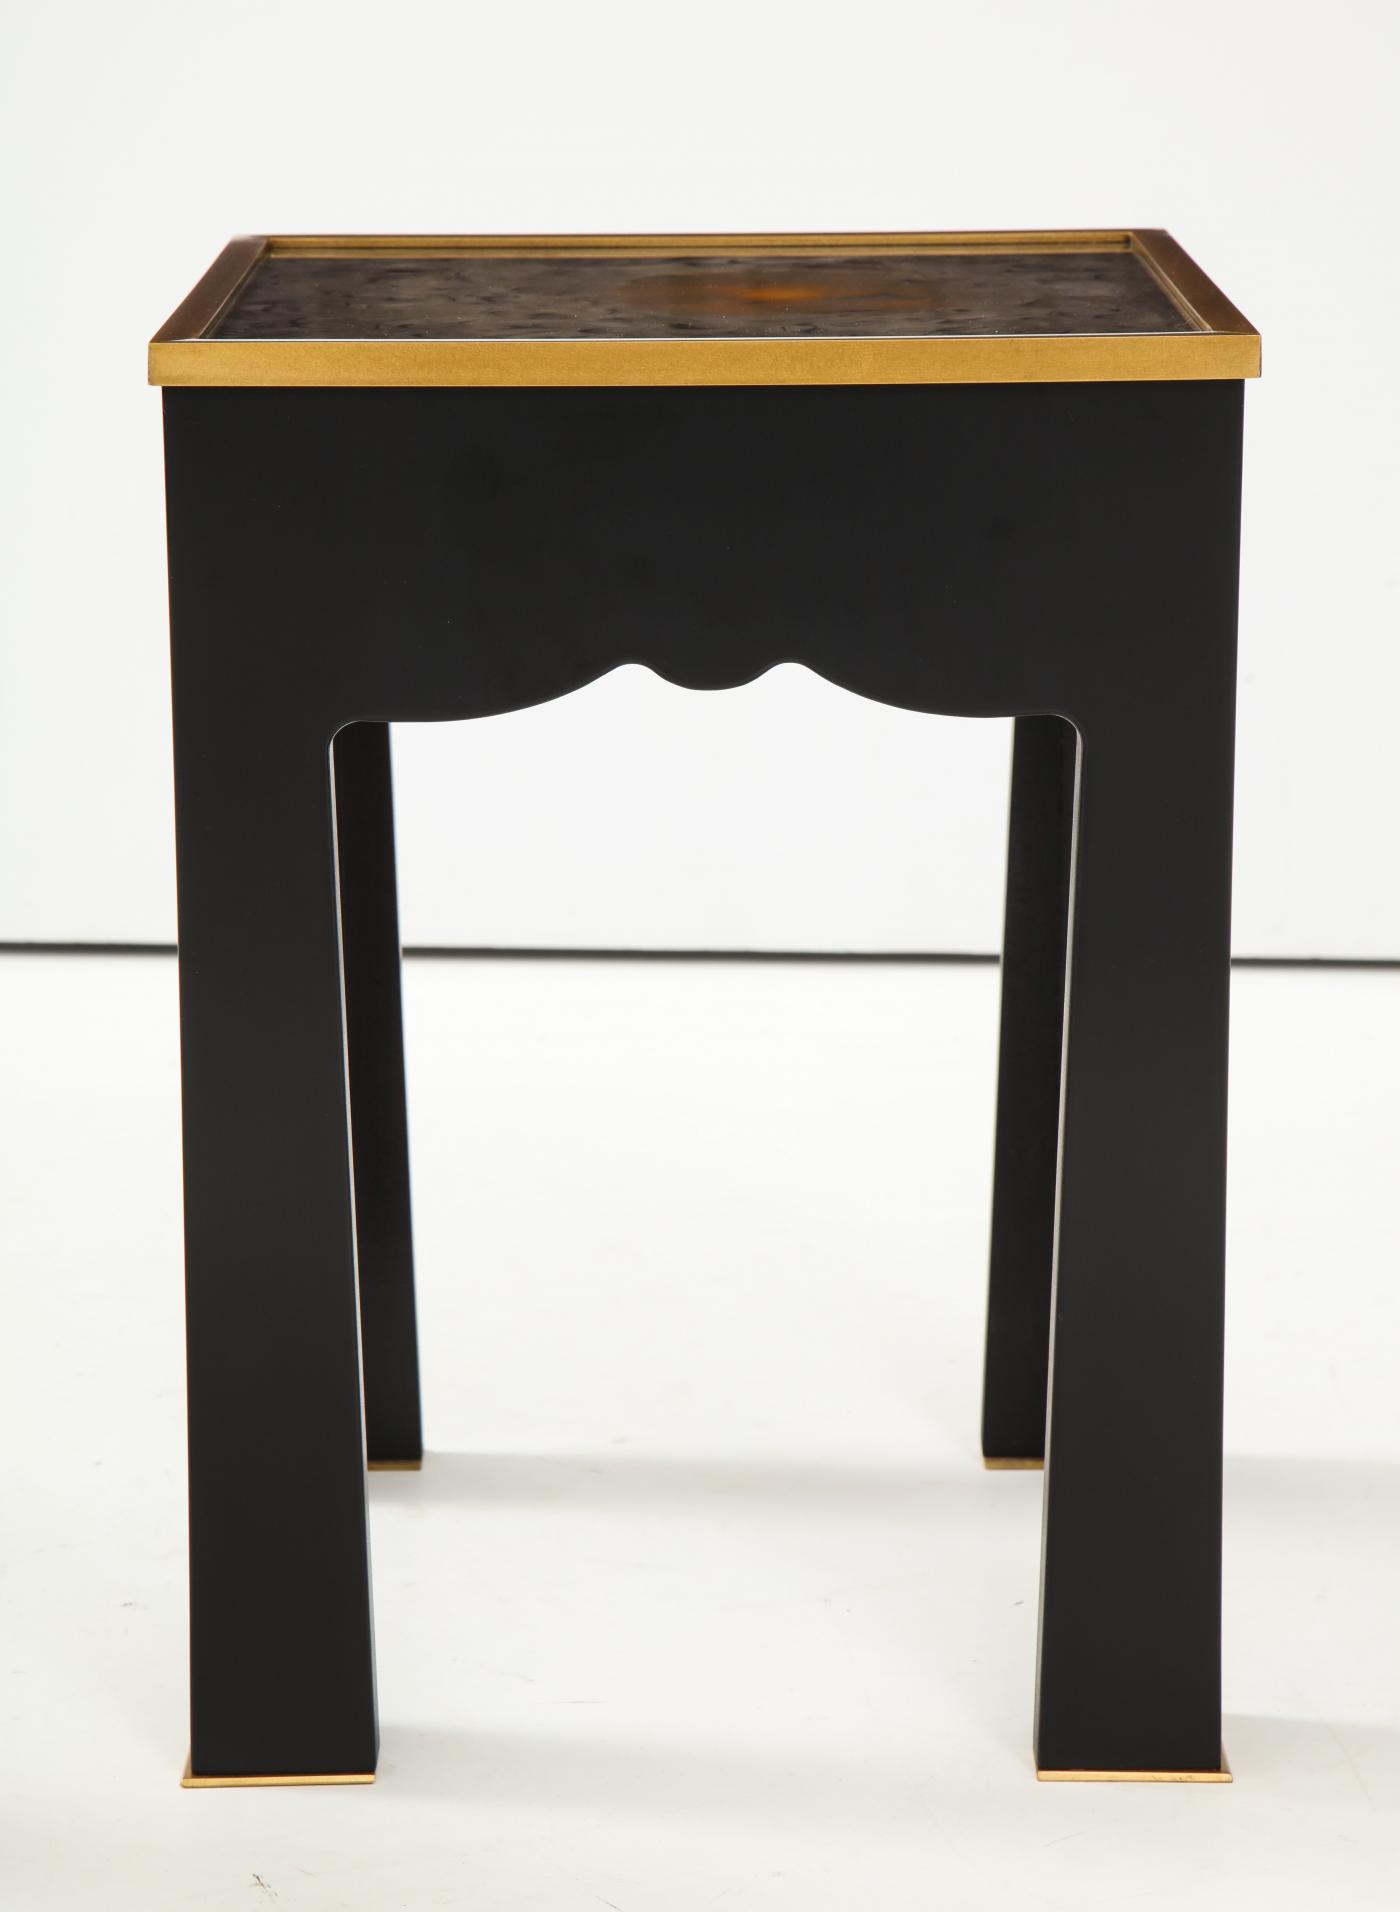 Pair of Salon side tables